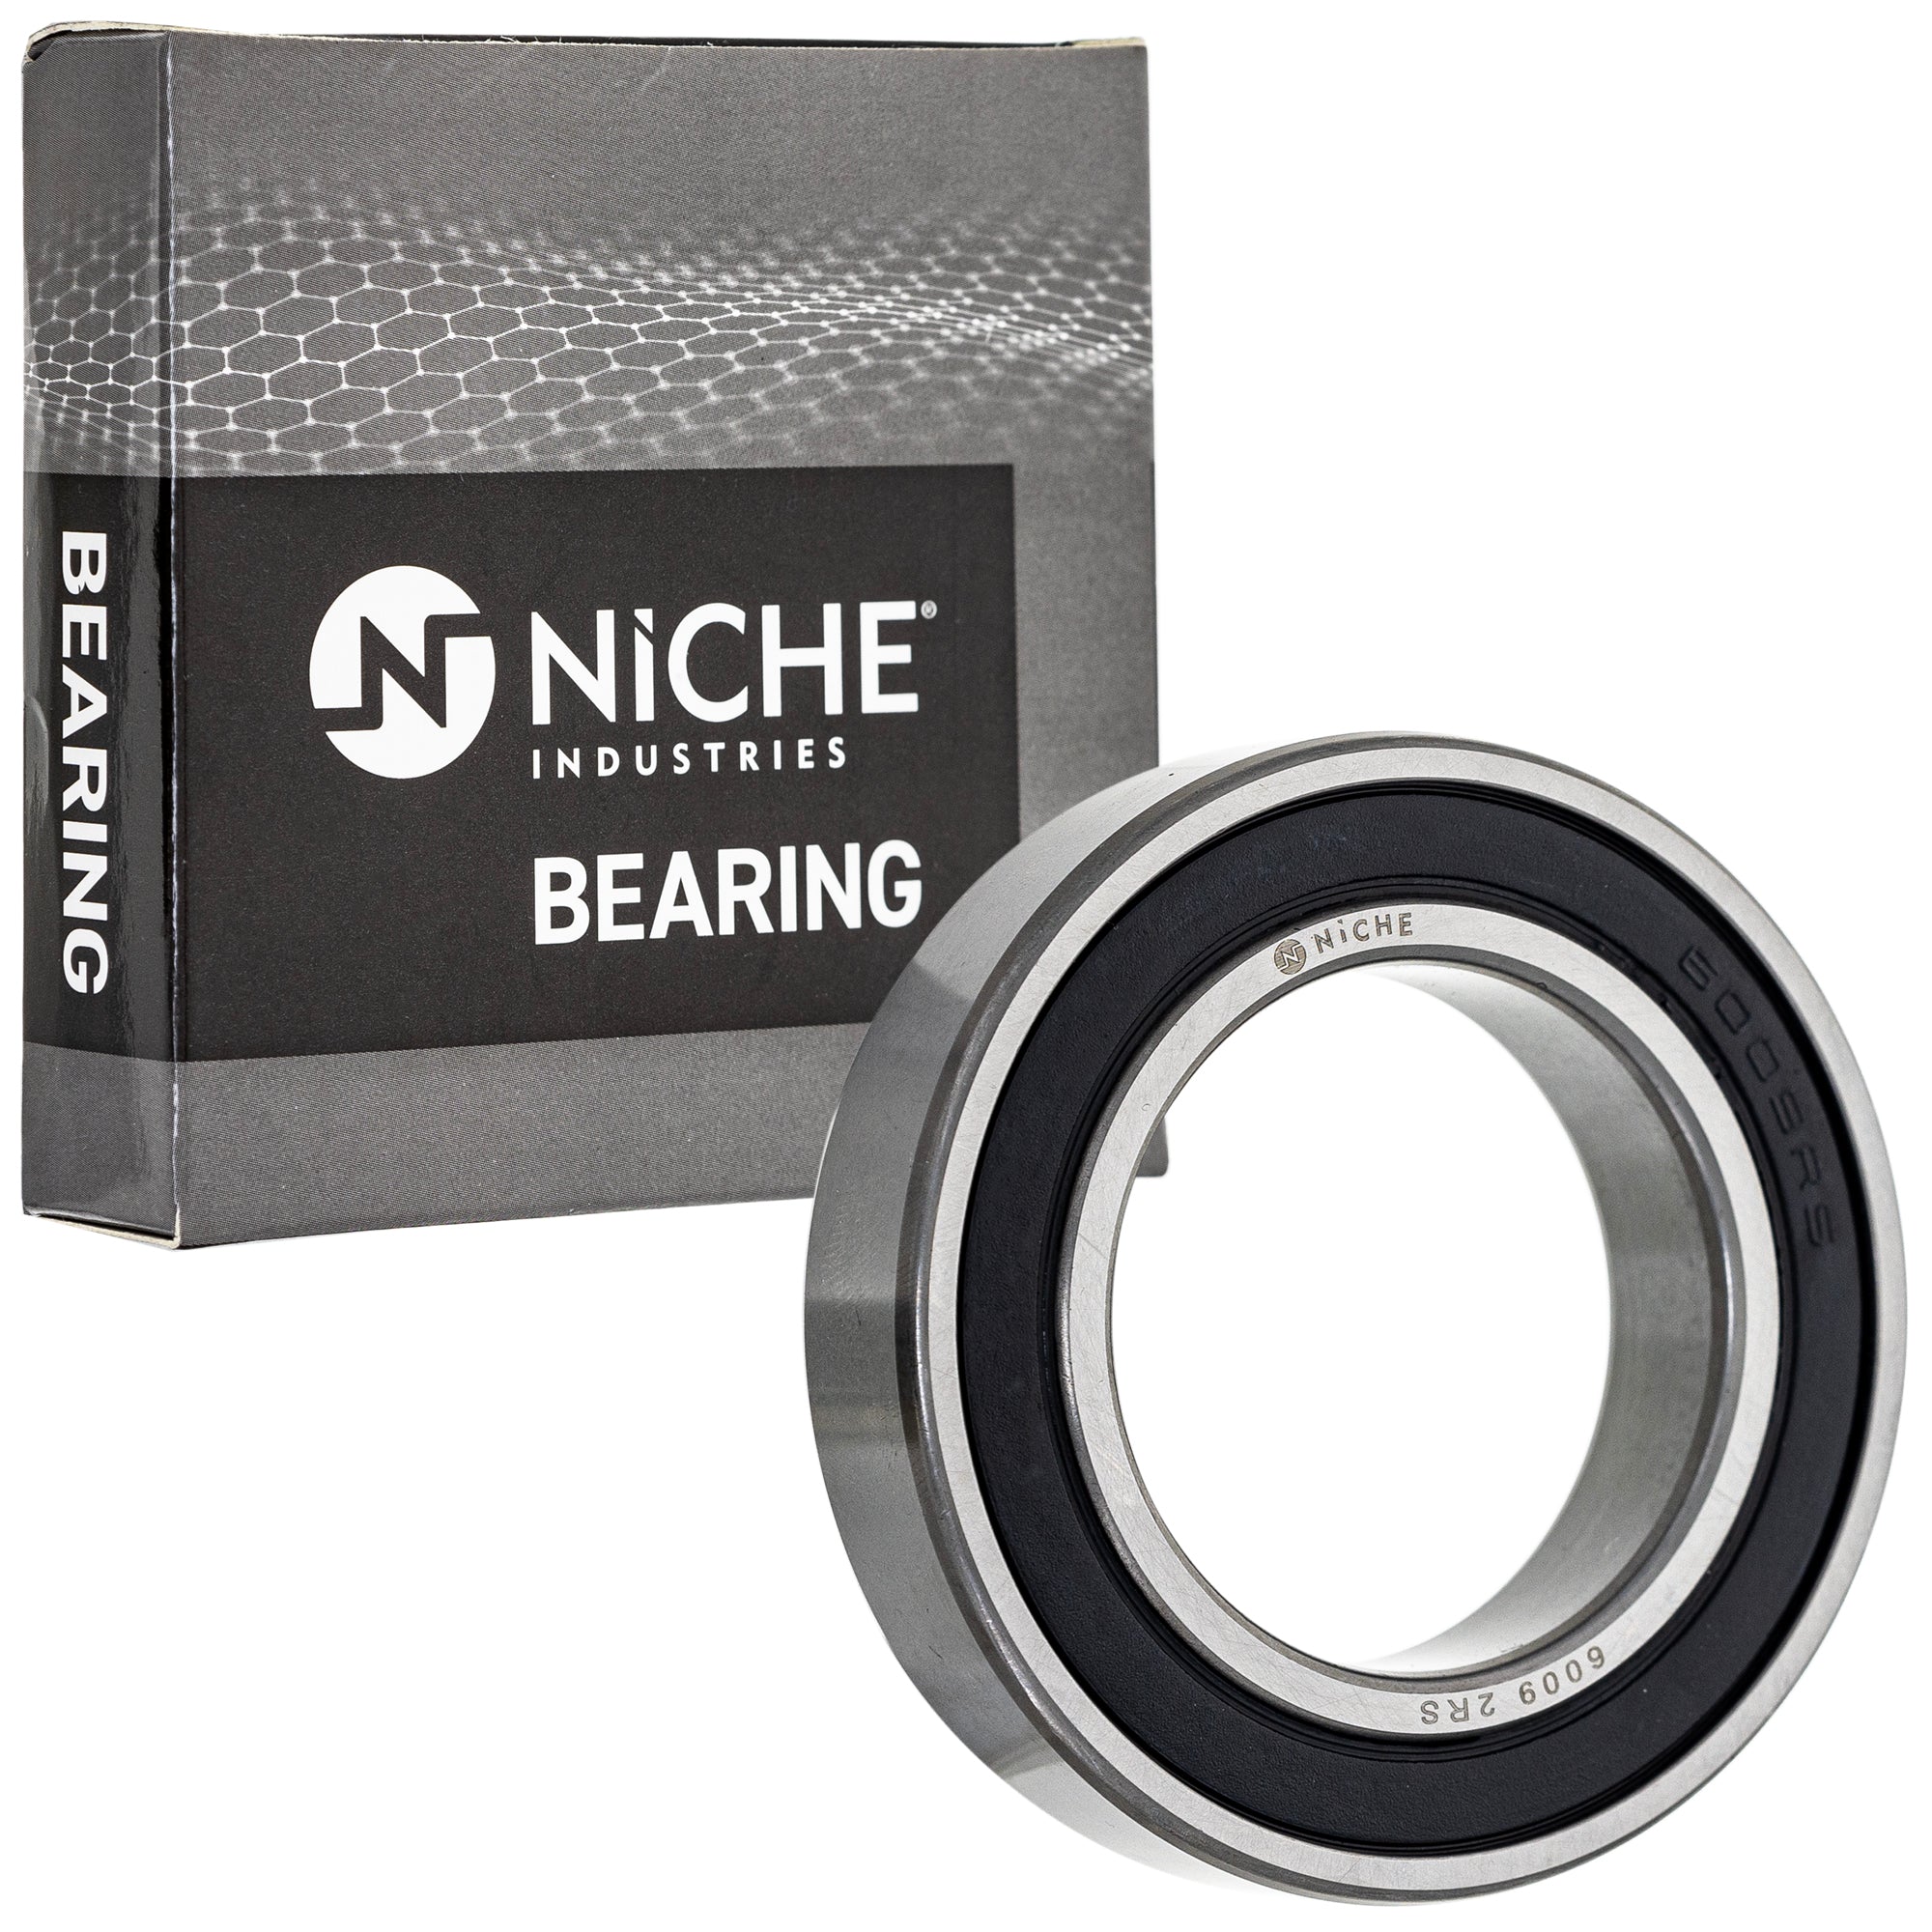 NICHE 519-CBB2269R Bearing for zOTHER FourTrax